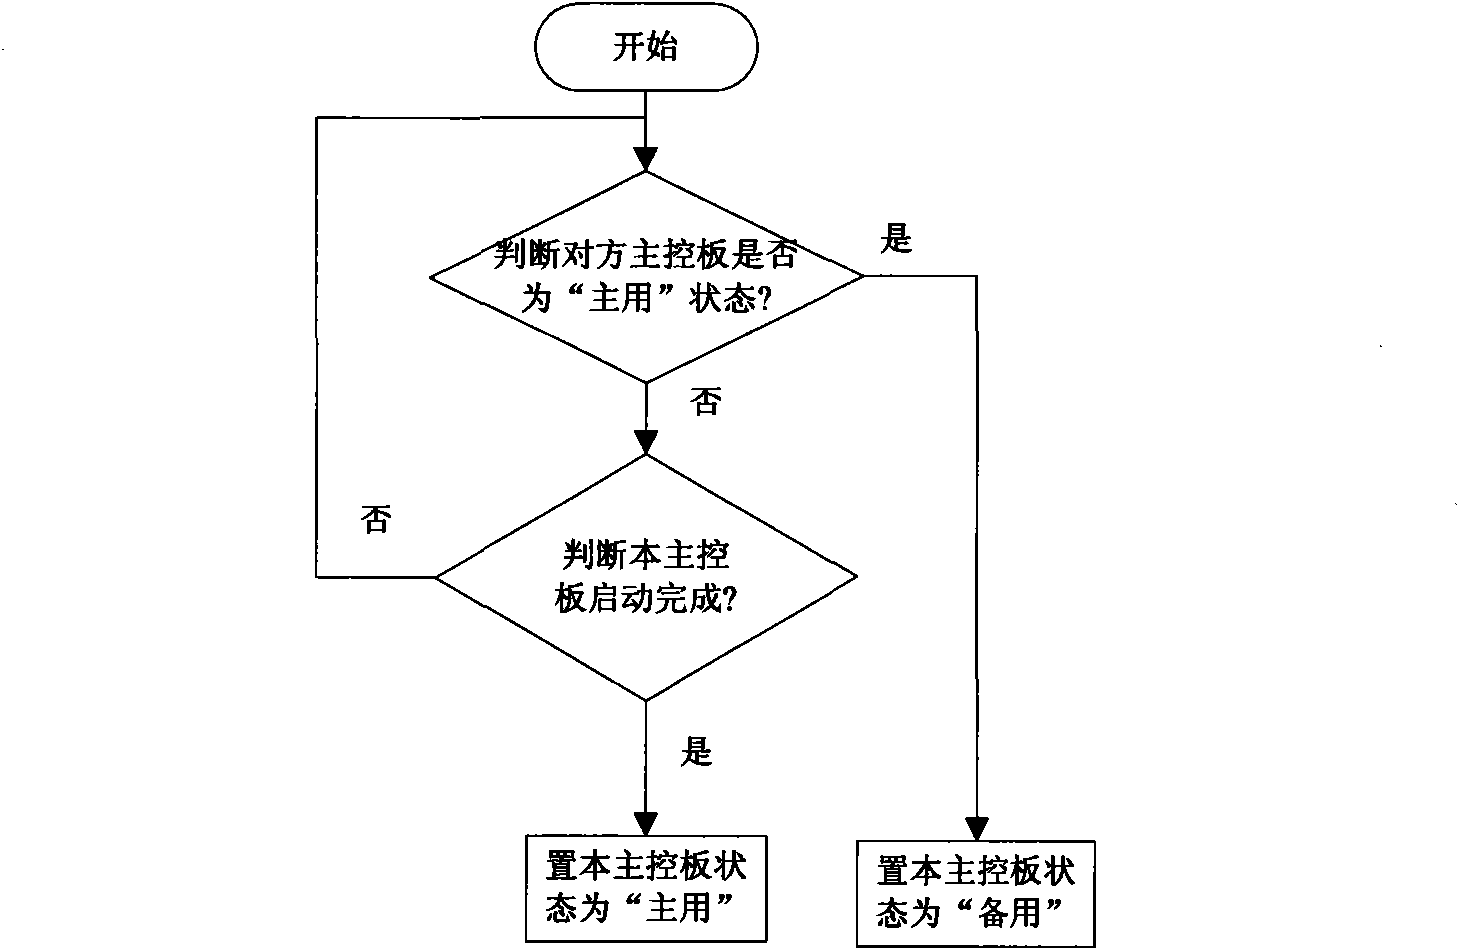 Synchronous data controller based hot standby system of main control unit and method thereof